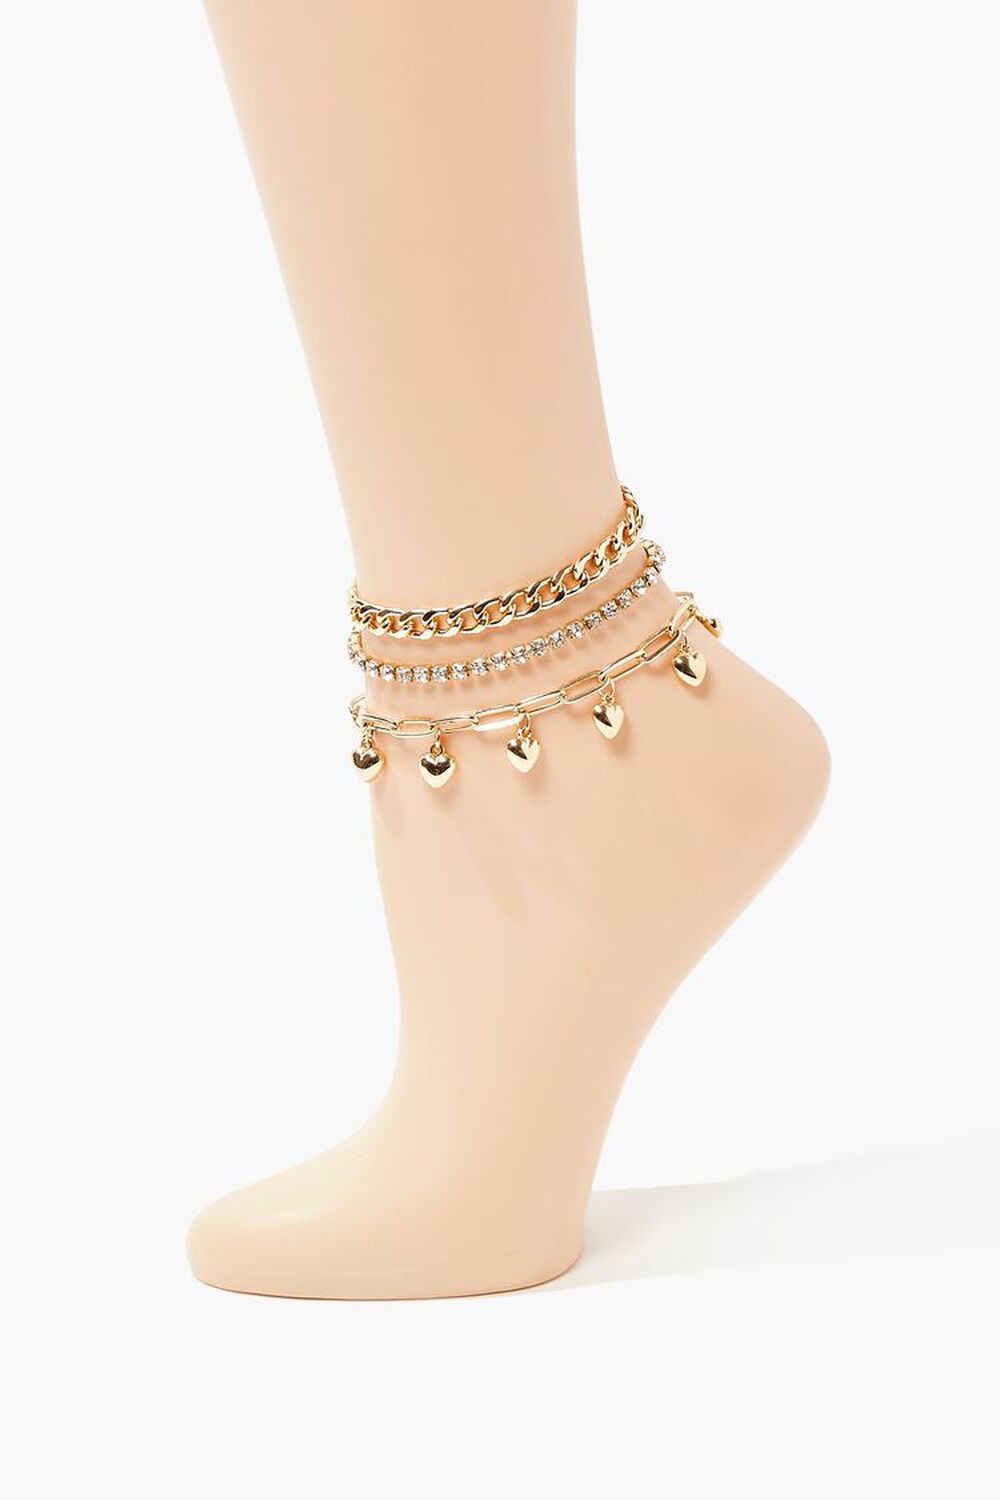 GOLD/CLEAR Heart Charm Anklet Set, image 1